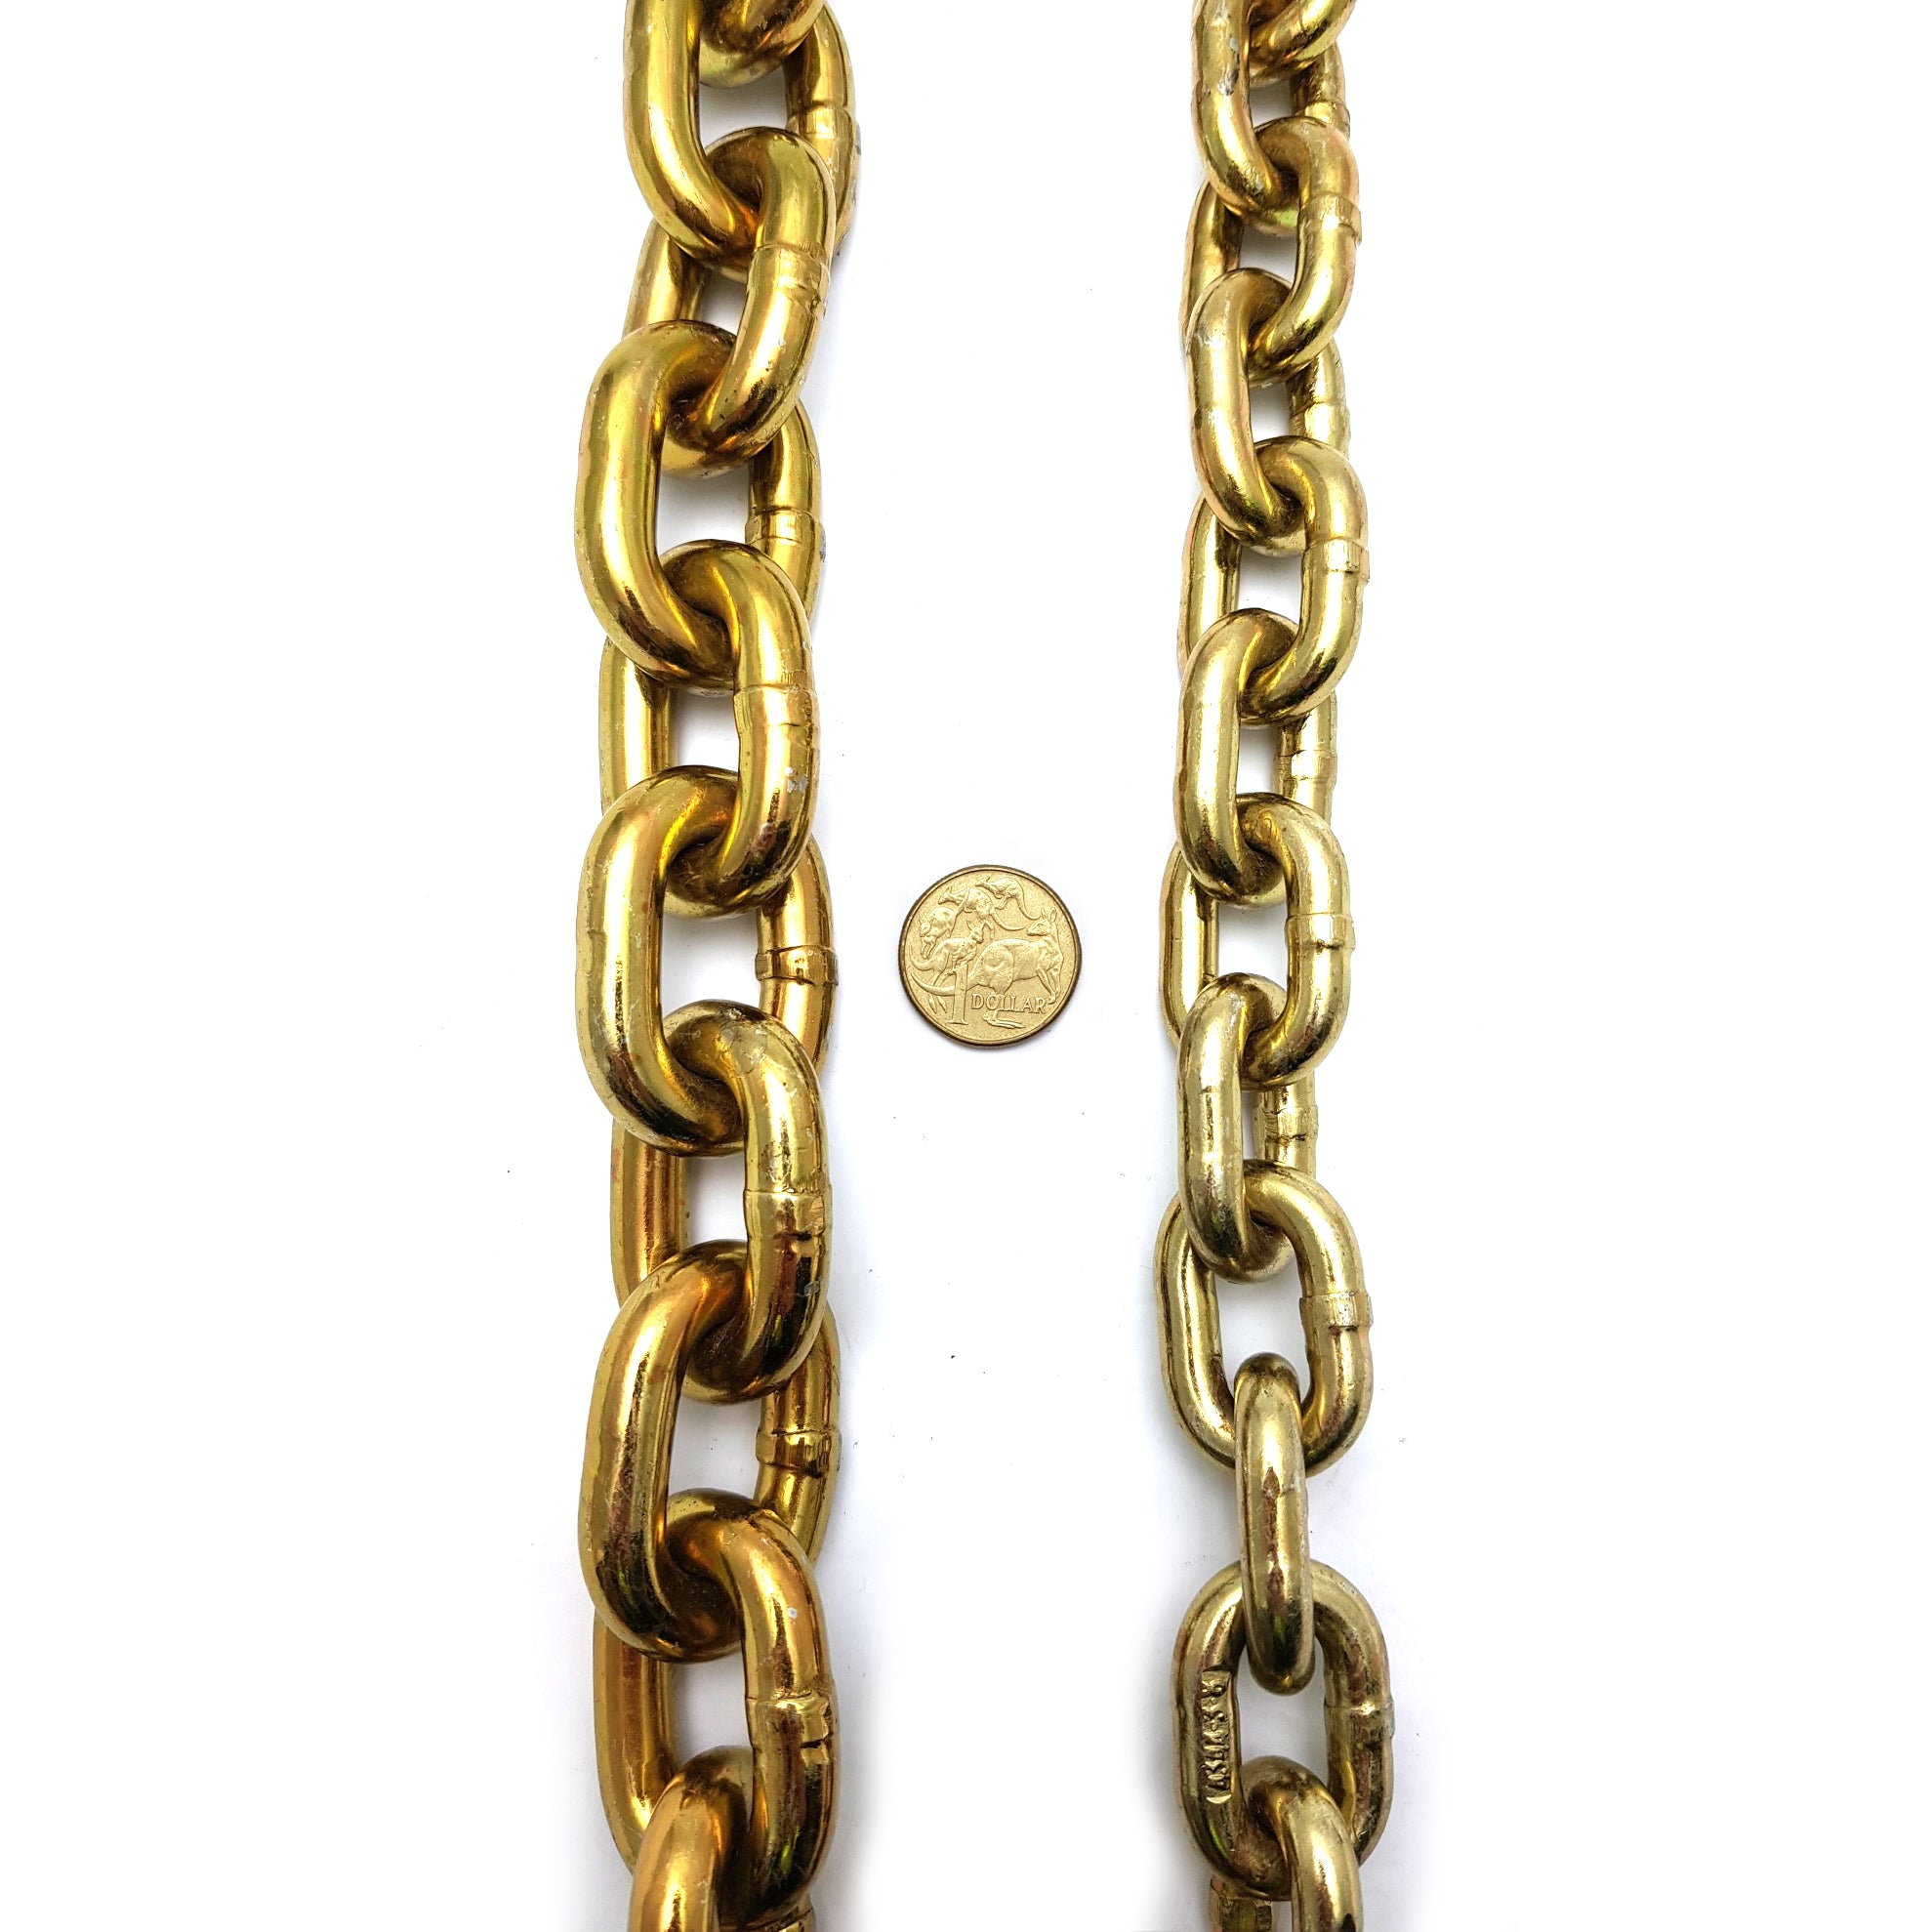 Hardened security chain, size: 10mm and 8mm x 2 metres long. Melbourne, Australia.